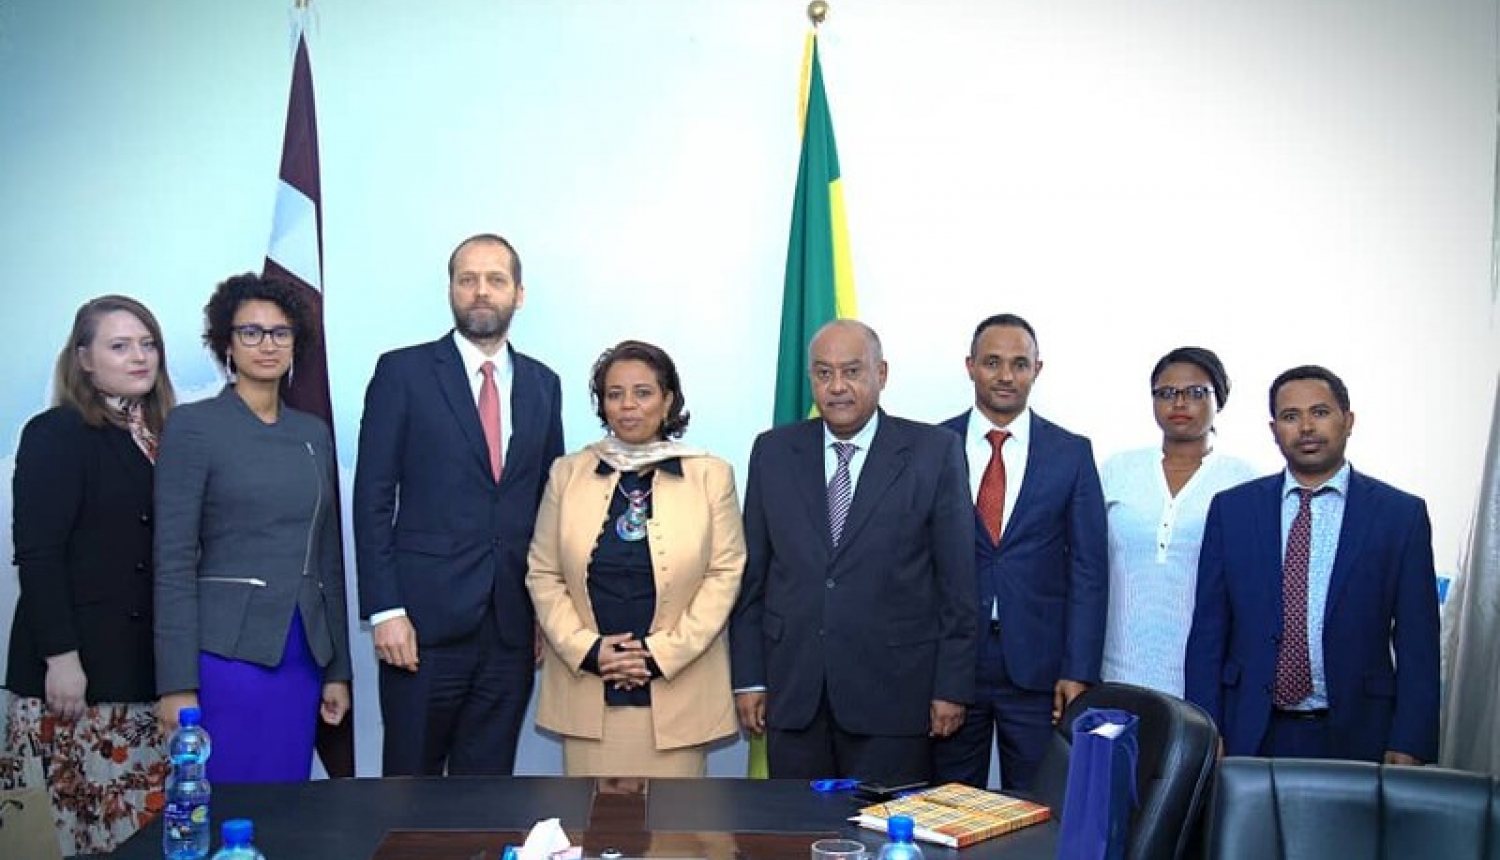 Ethiopia invites Latvia to strengthen its presence in Africa